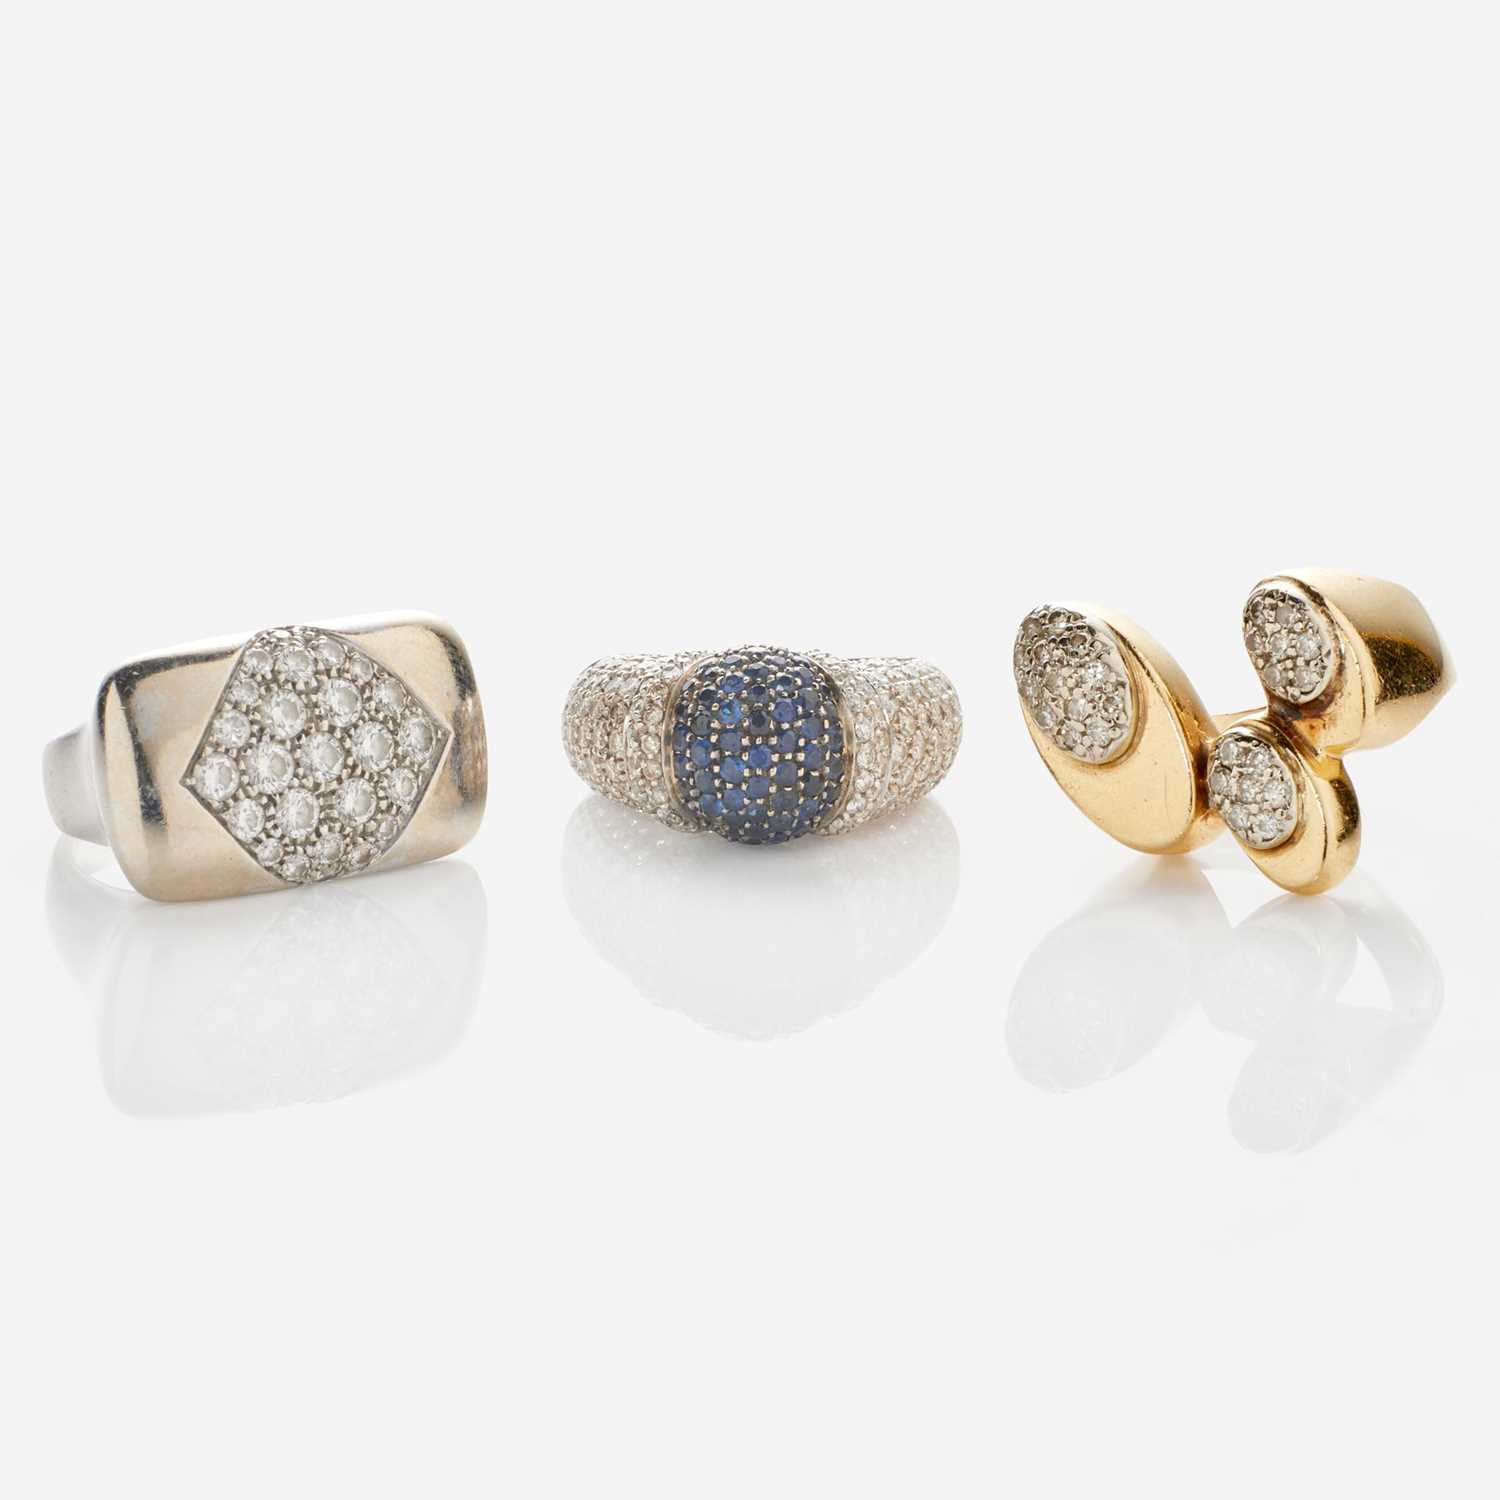 Lot 81 - A Group of Three Gold and Gemstone Ladies Rings